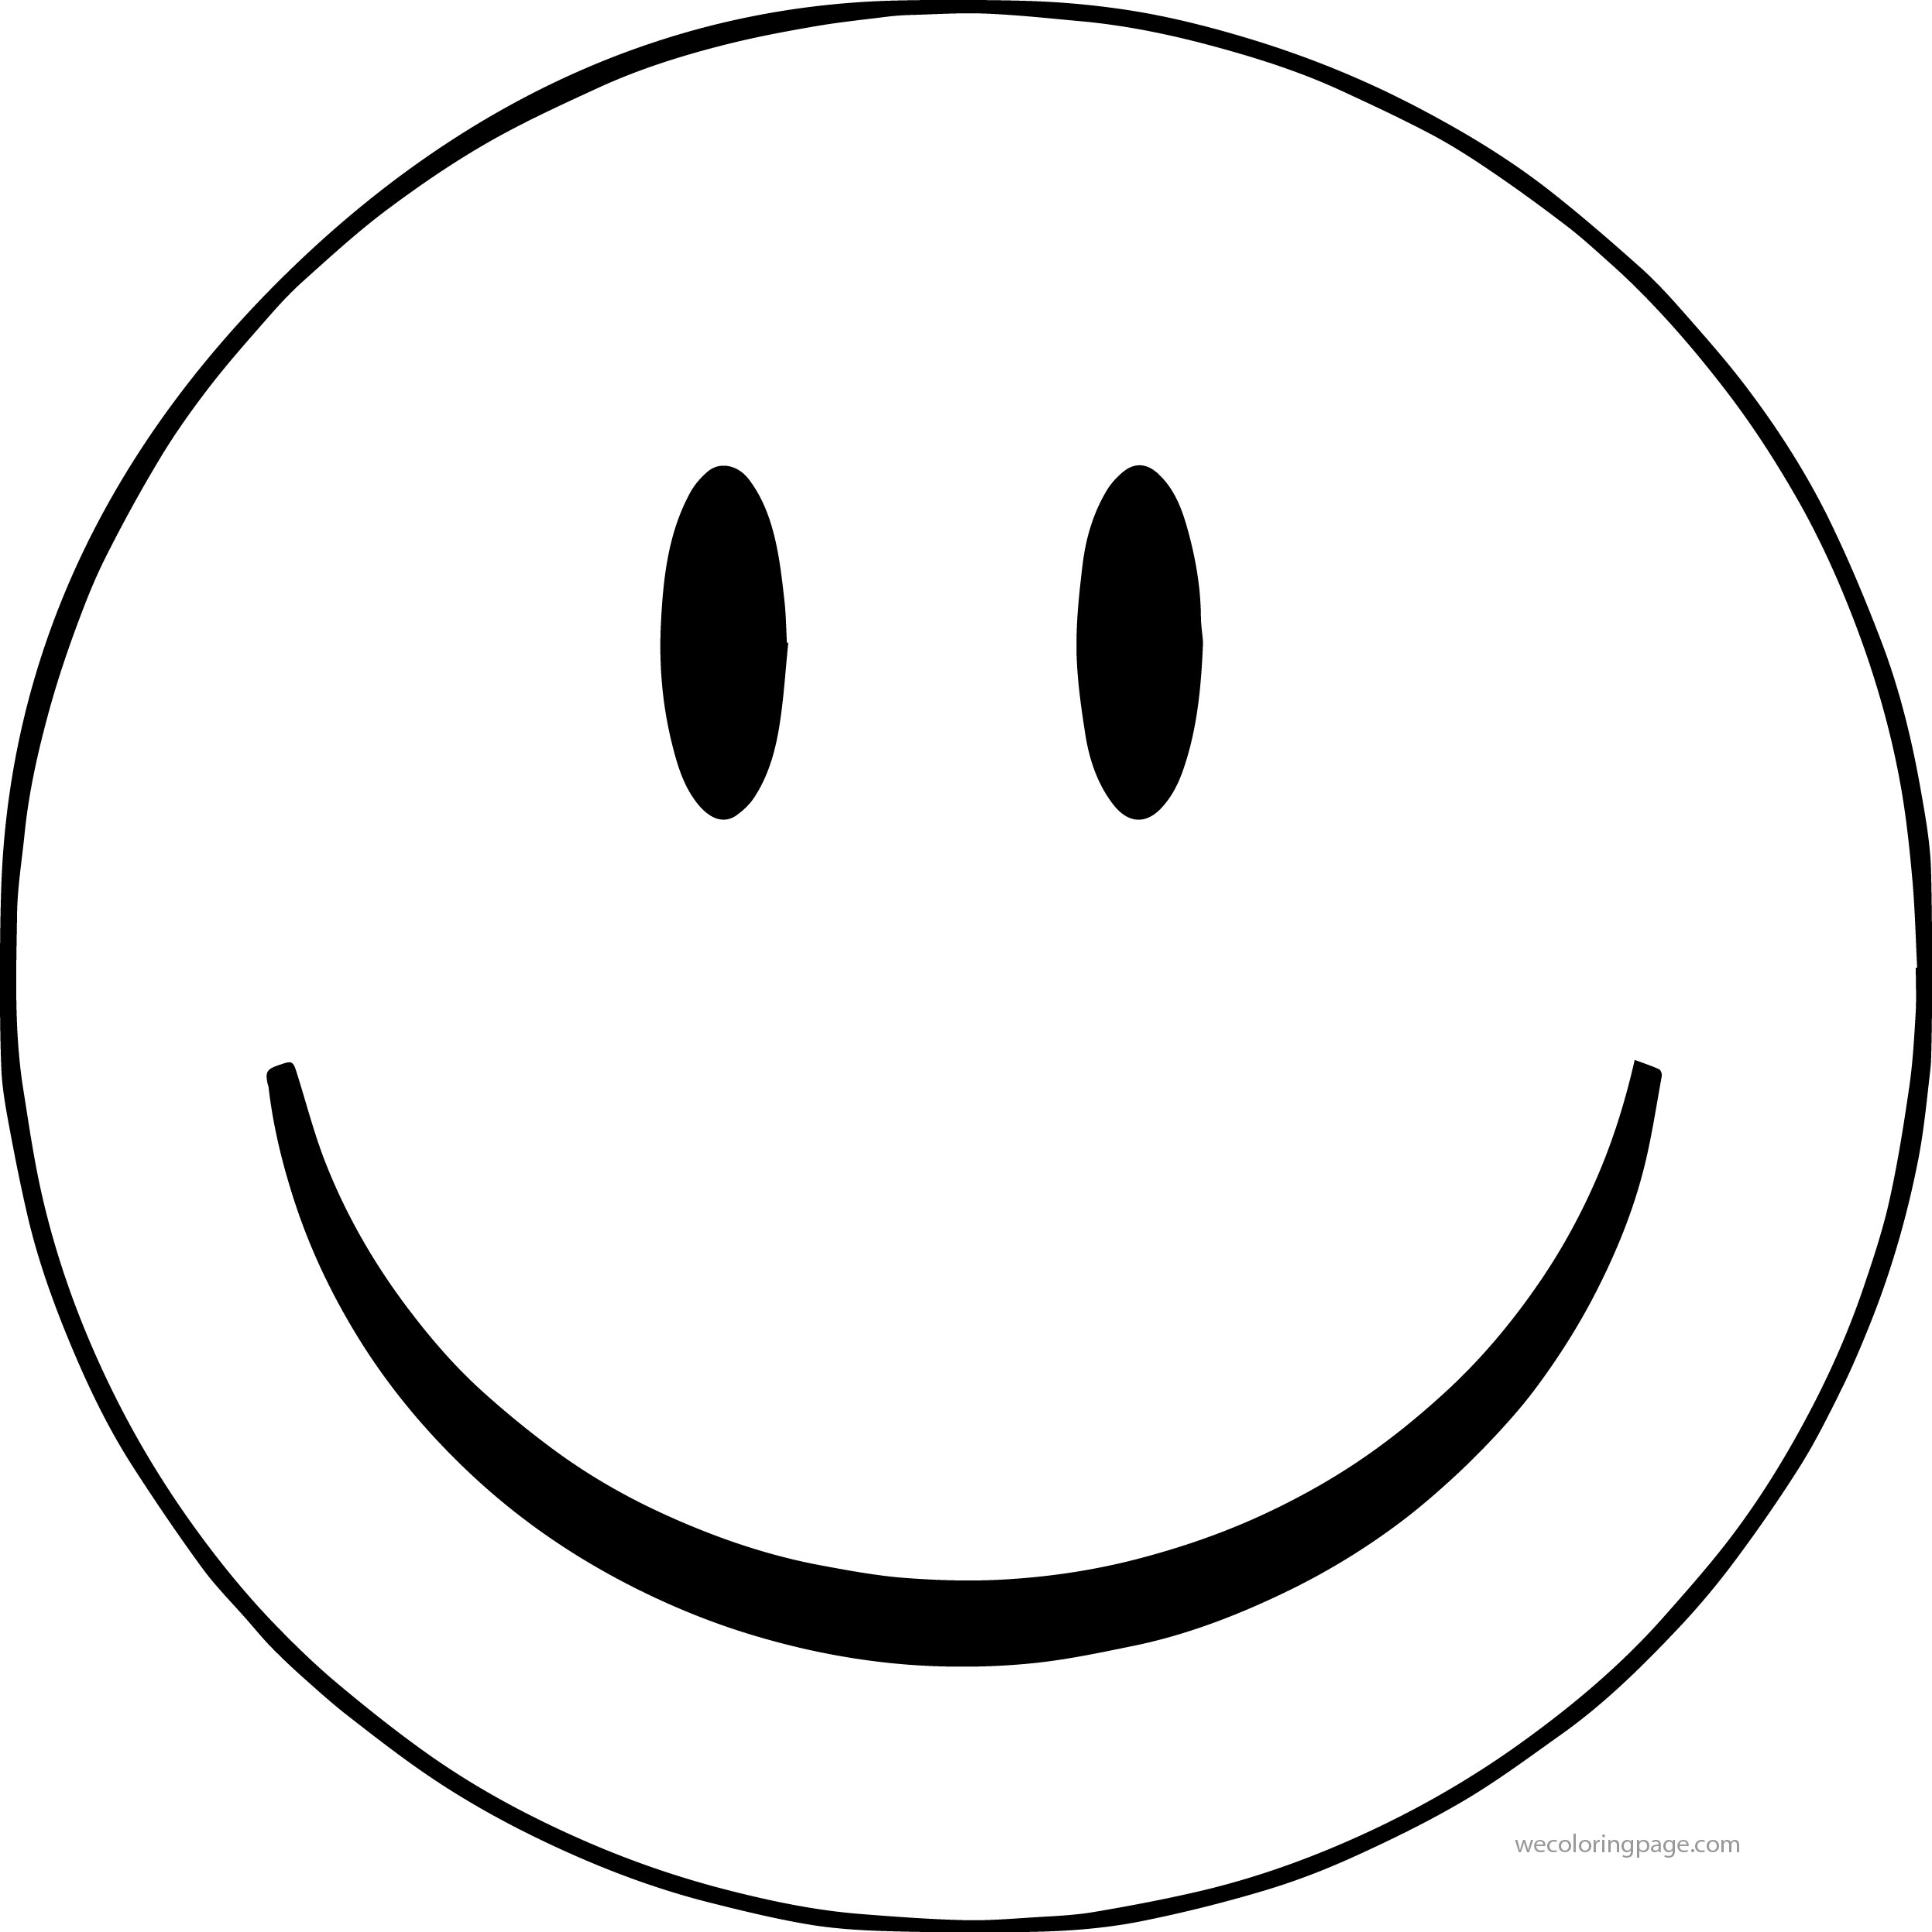 face-smiley-face-happy-face-clip-art-big-coloring-page-2-wecoloringpage